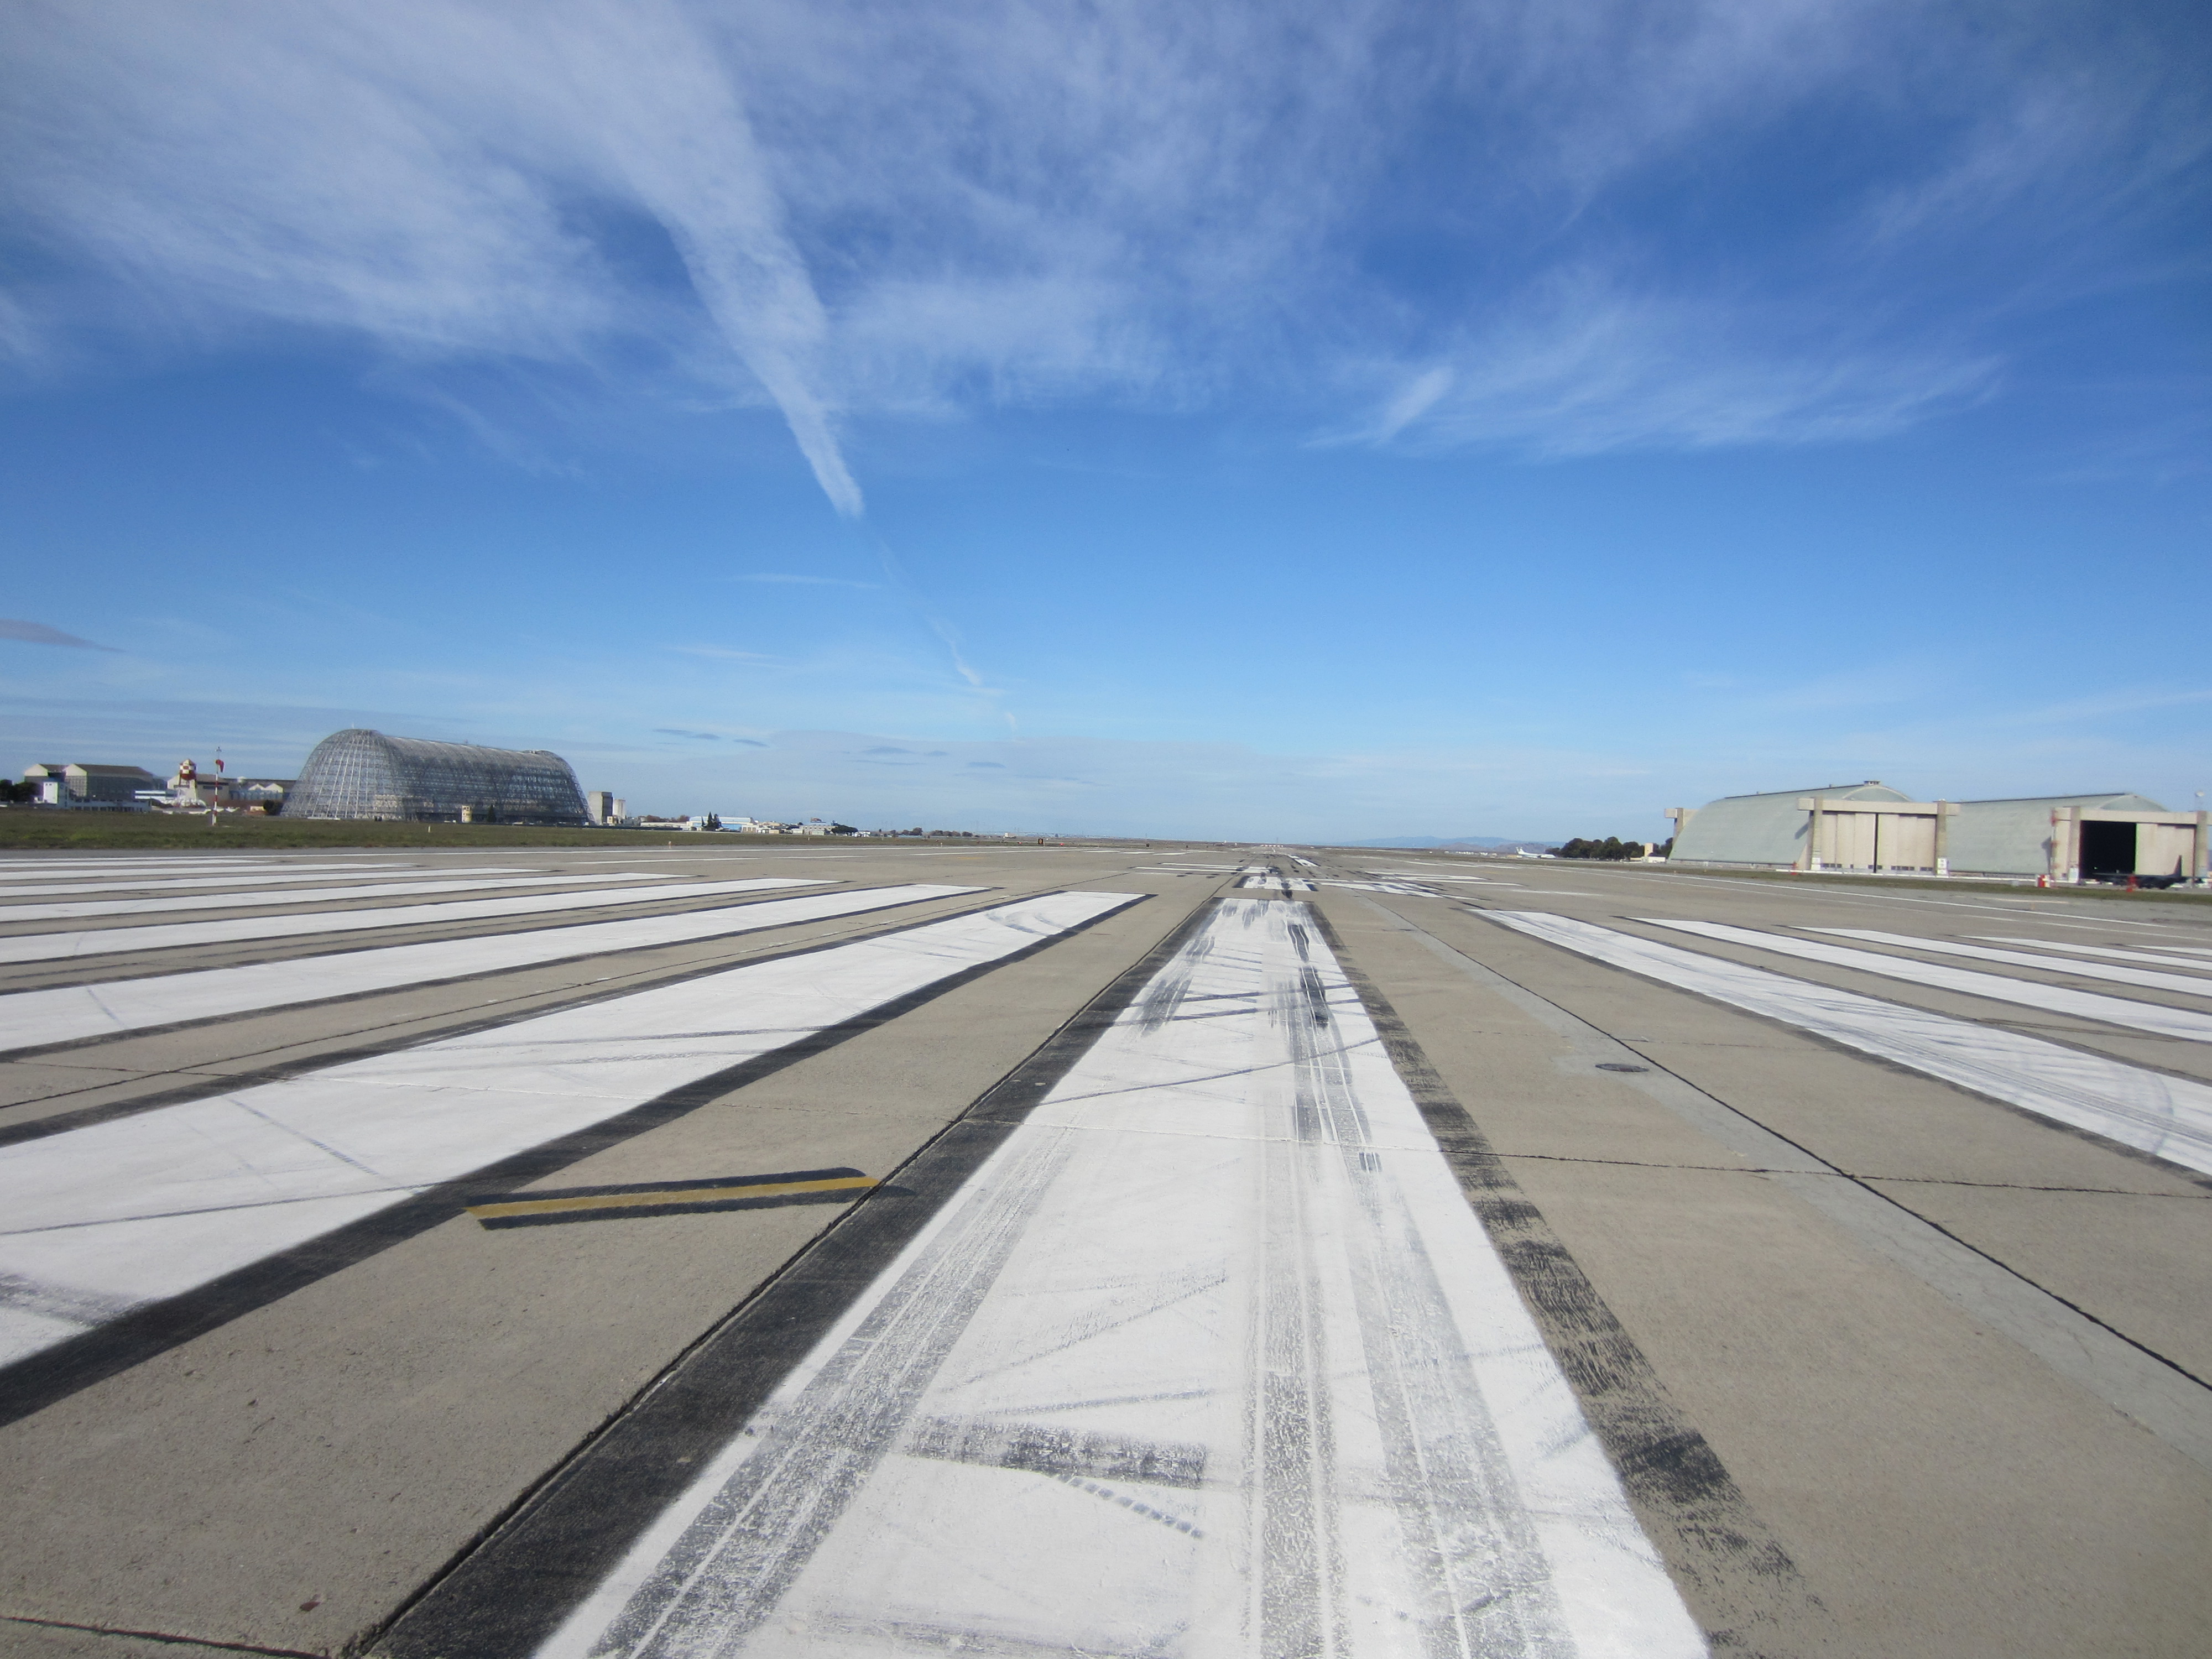 Moffett Federal Airfield aircraft runway with views of hangars 1, 2, and 3